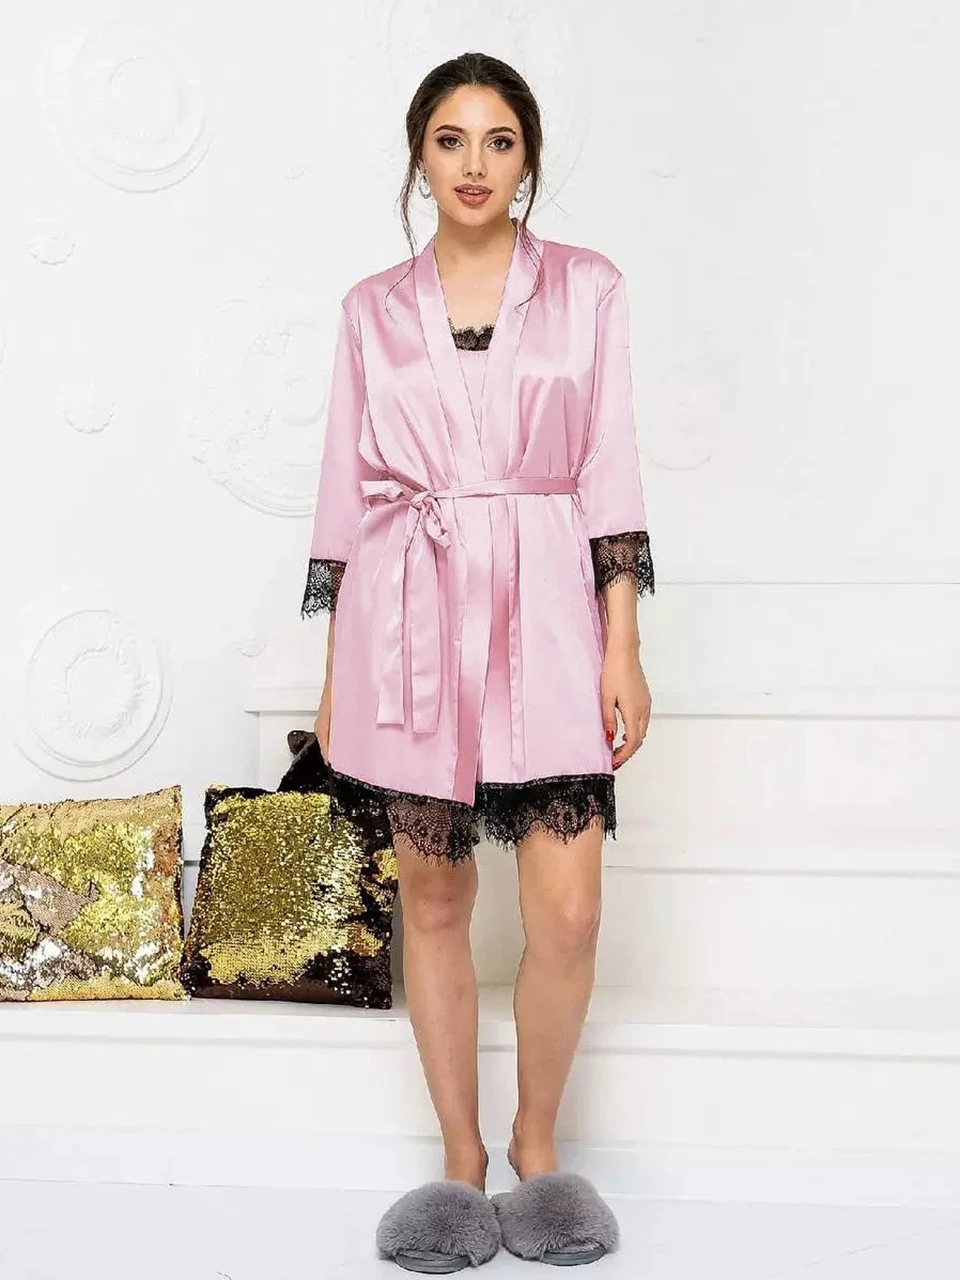 

Lace Patchwork Robe Women's Home Clothes Sexy Woman Nightie Bathrobe Female Nightgowns Lace Up Robes Pajama Sets Satin Nightwear